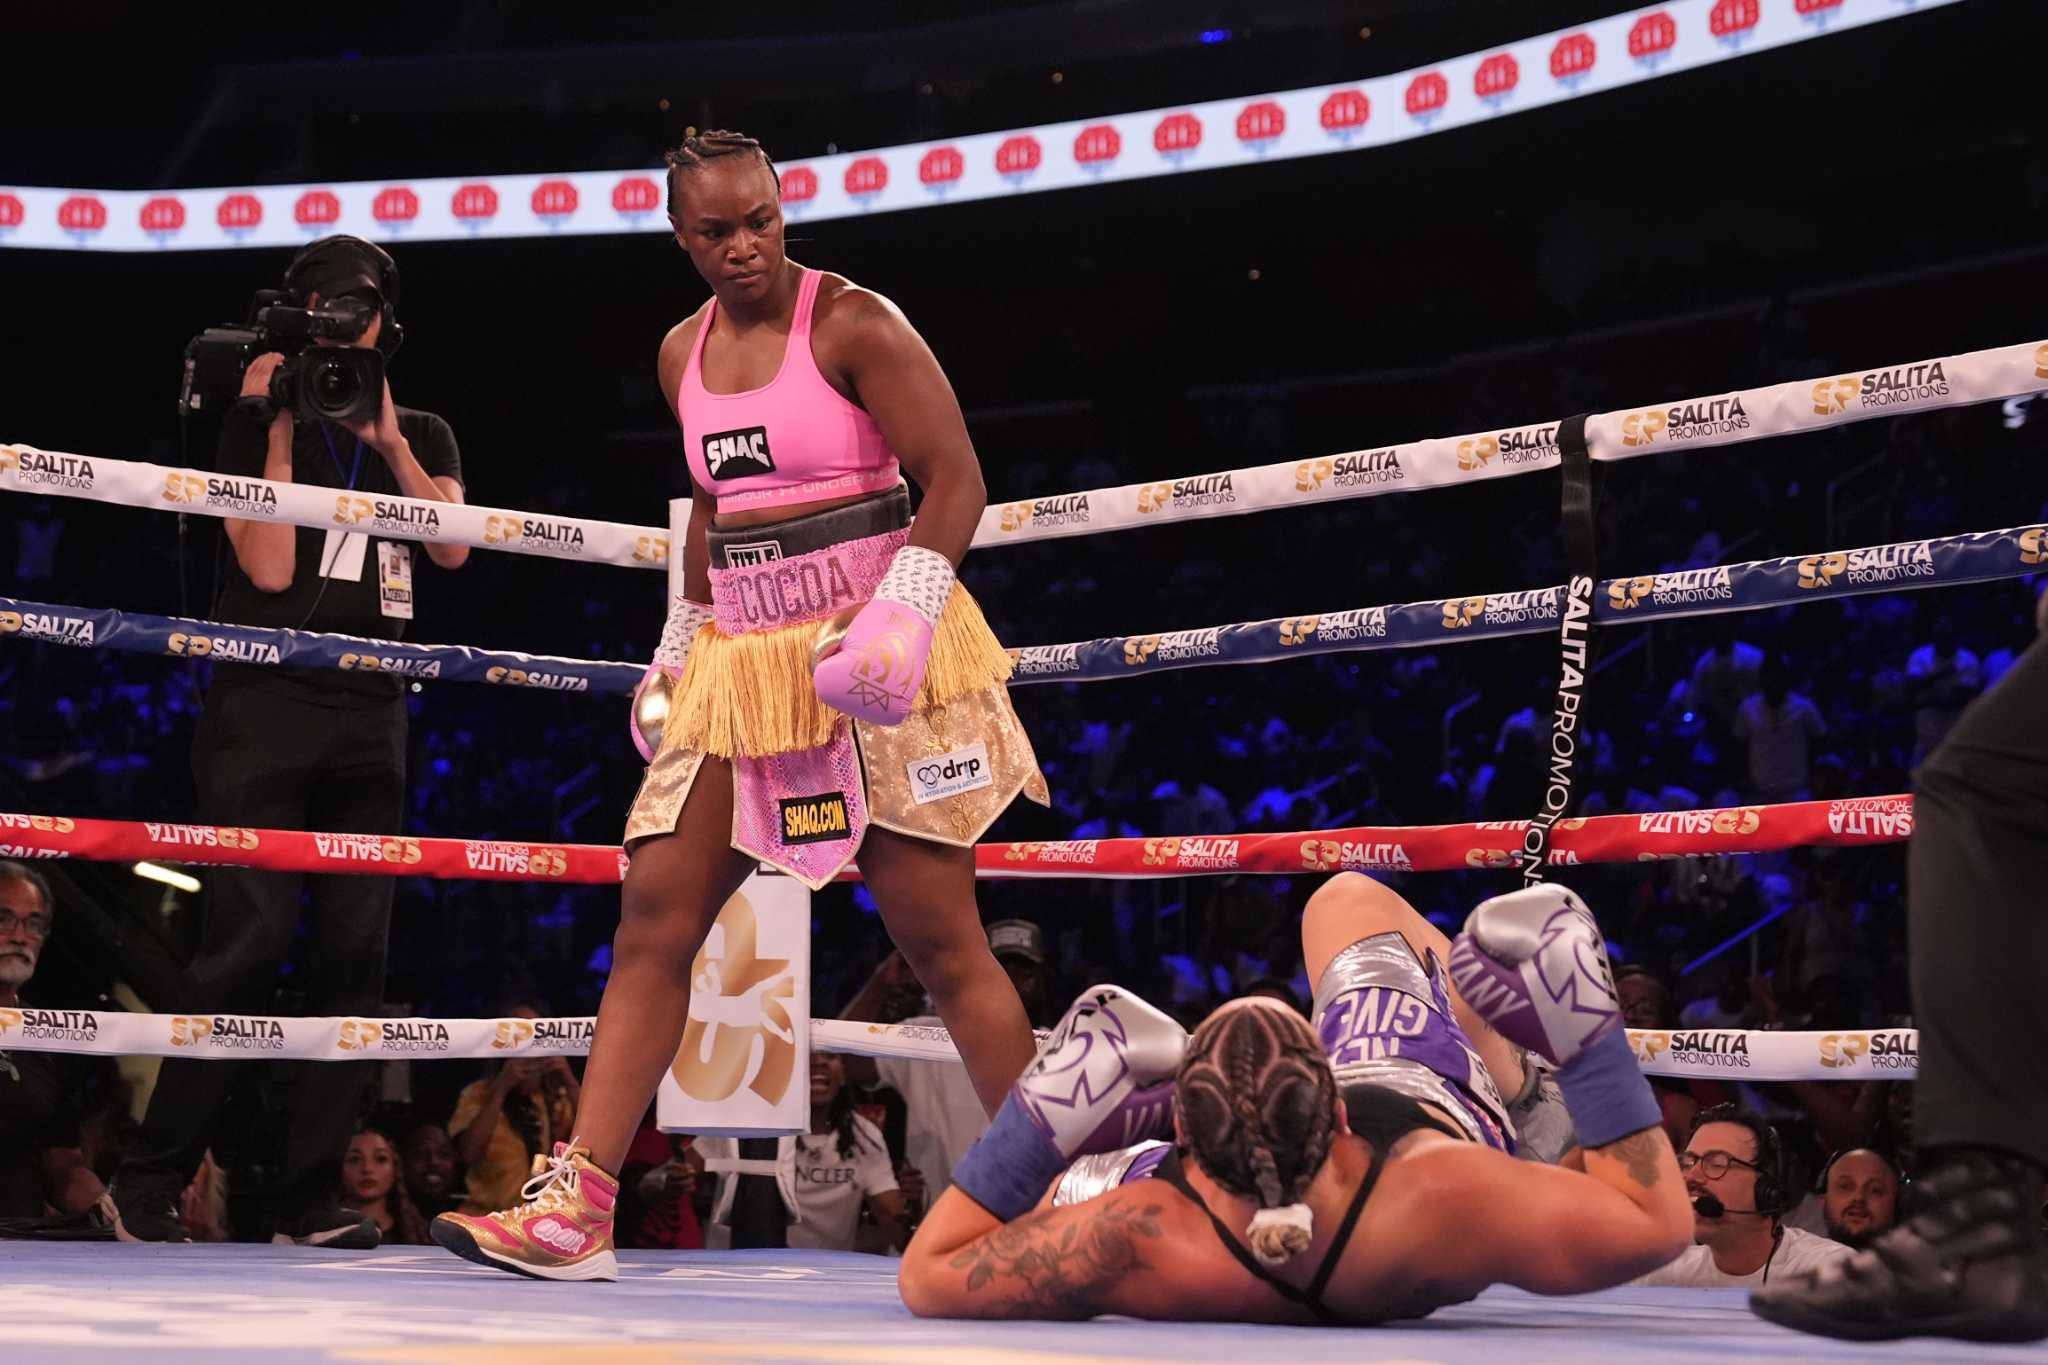 Claressa Shields knocks out Vanessa Lepage-Joanisse in 2nd round, winning 4th and 5th titles